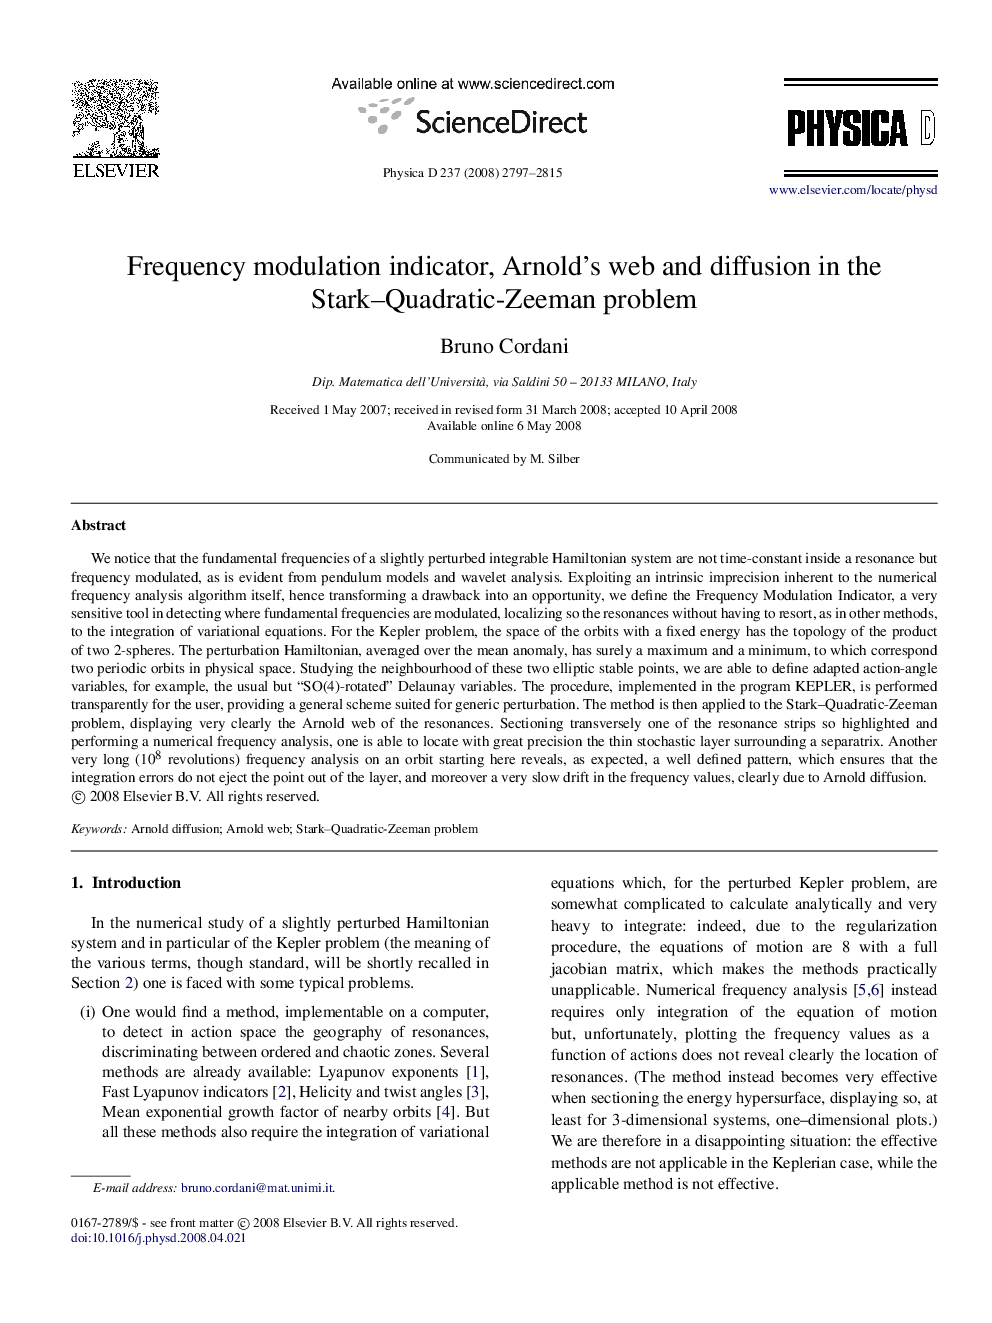 Frequency modulation indicator, Arnold's web and diffusion in the Stark-Quadratic-Zeeman problem